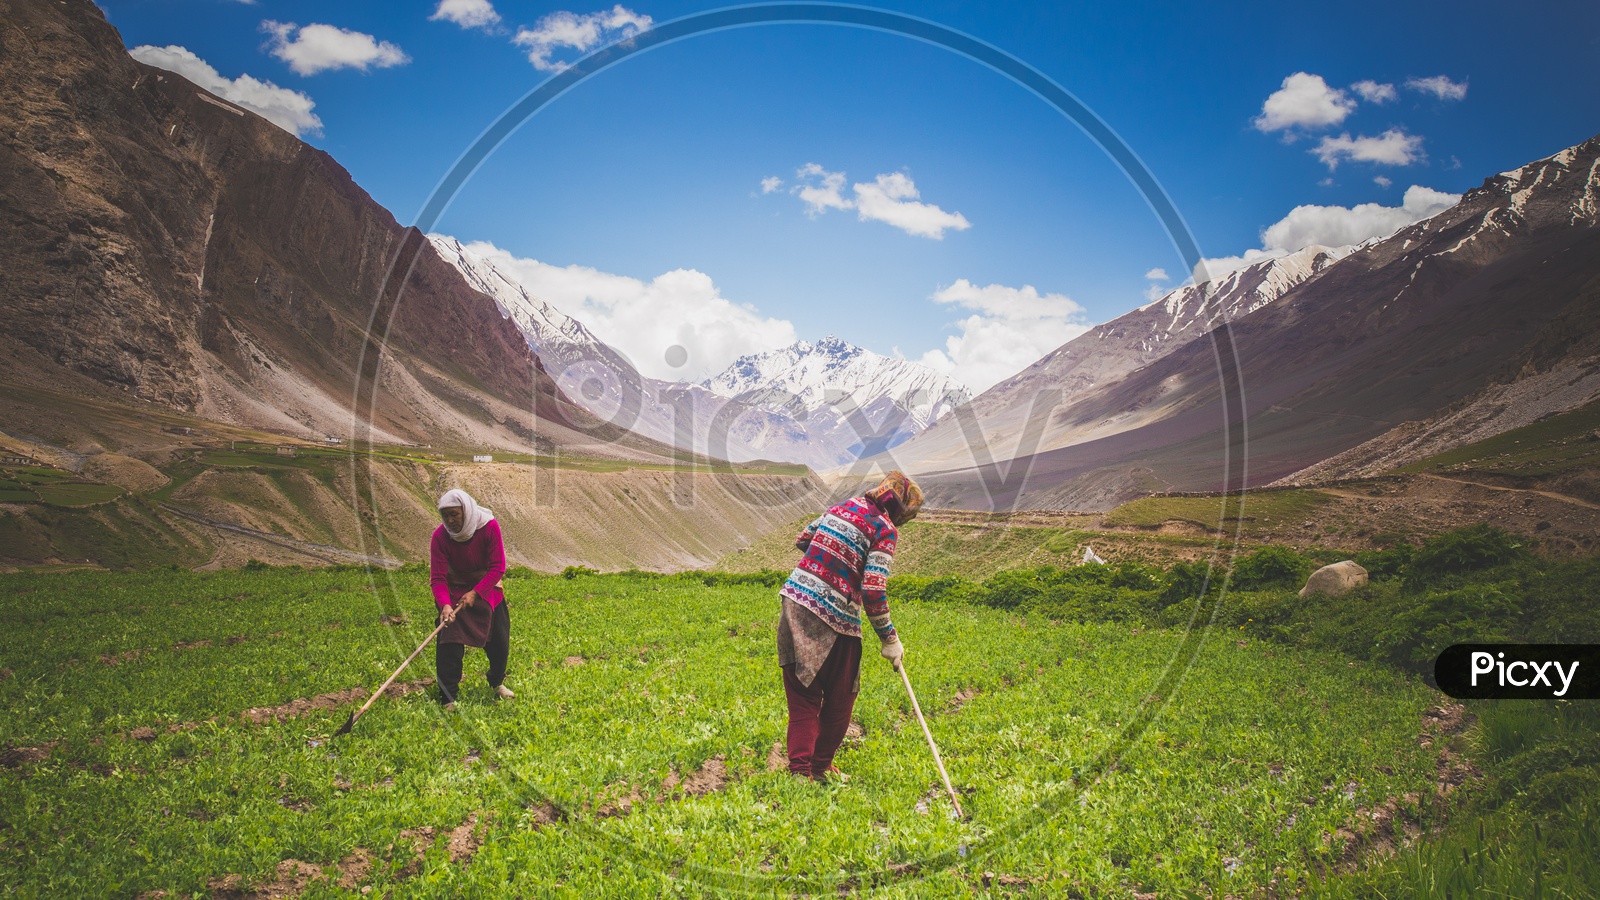 Women Working in the Cultivation Fields In the Terrain Villages of Spiti Valley